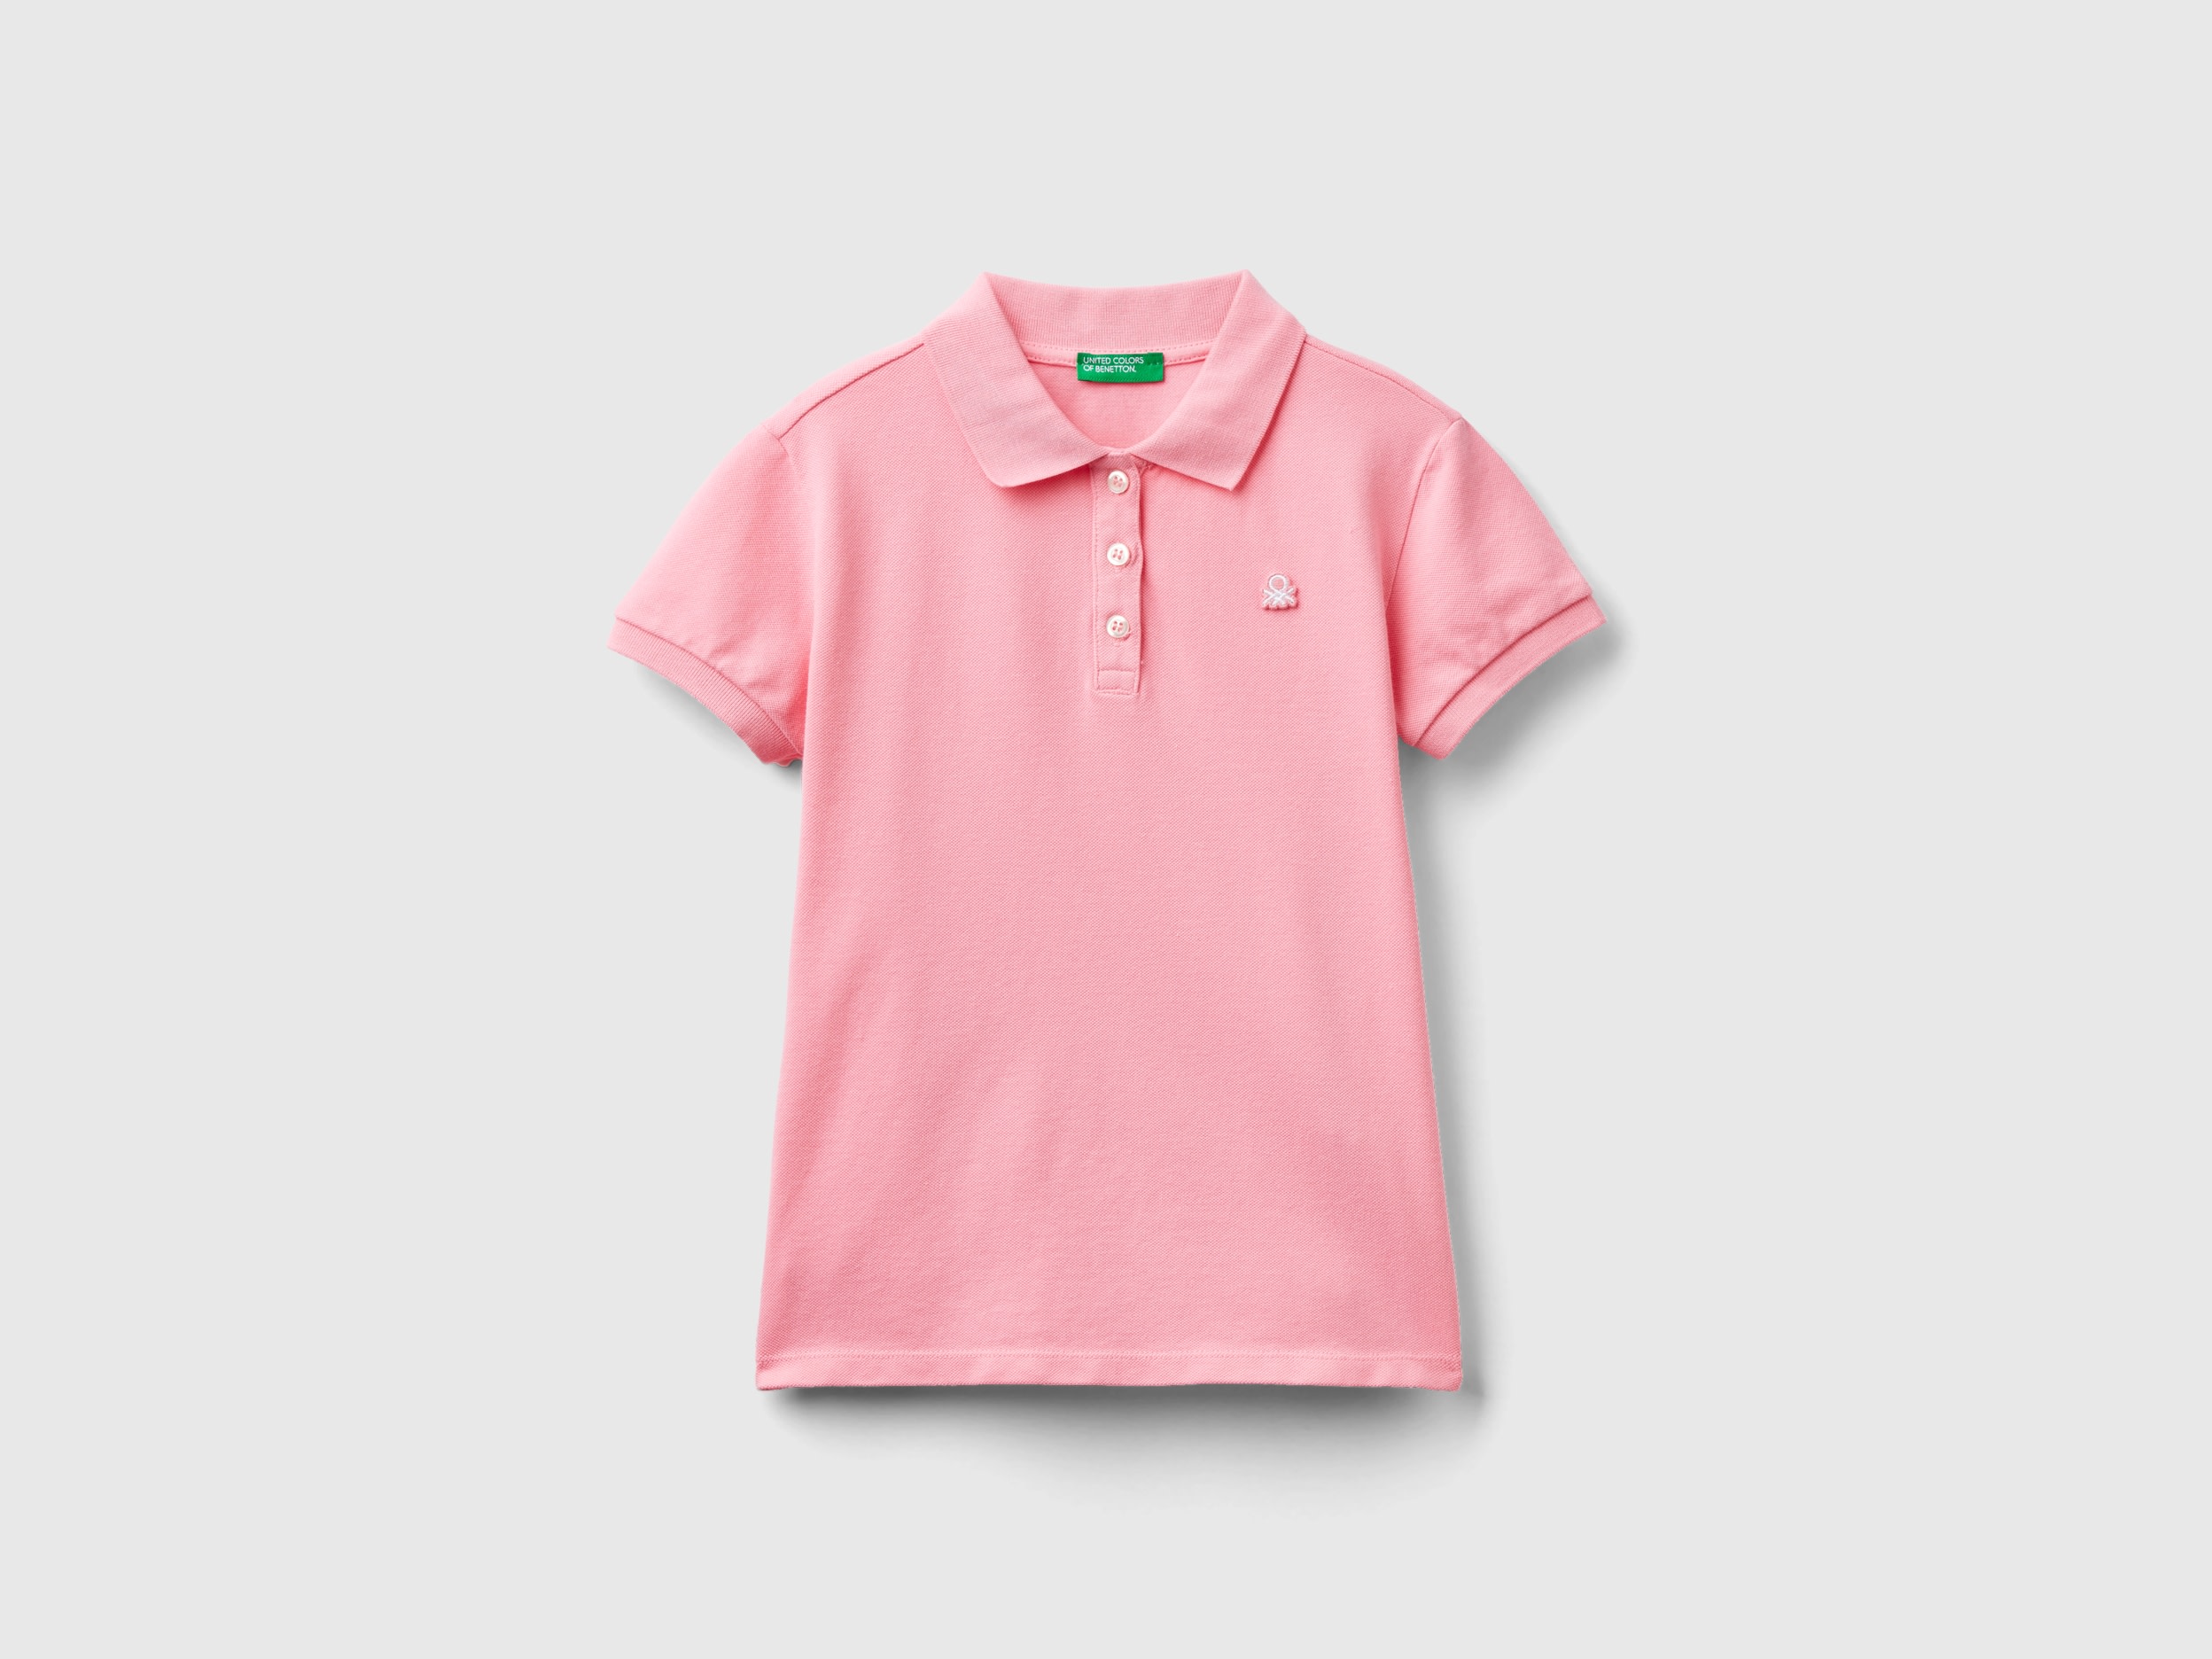 Image of Benetton, Short Sleeve Polo In Organic Cotton, size 3XL, Pink, Kids